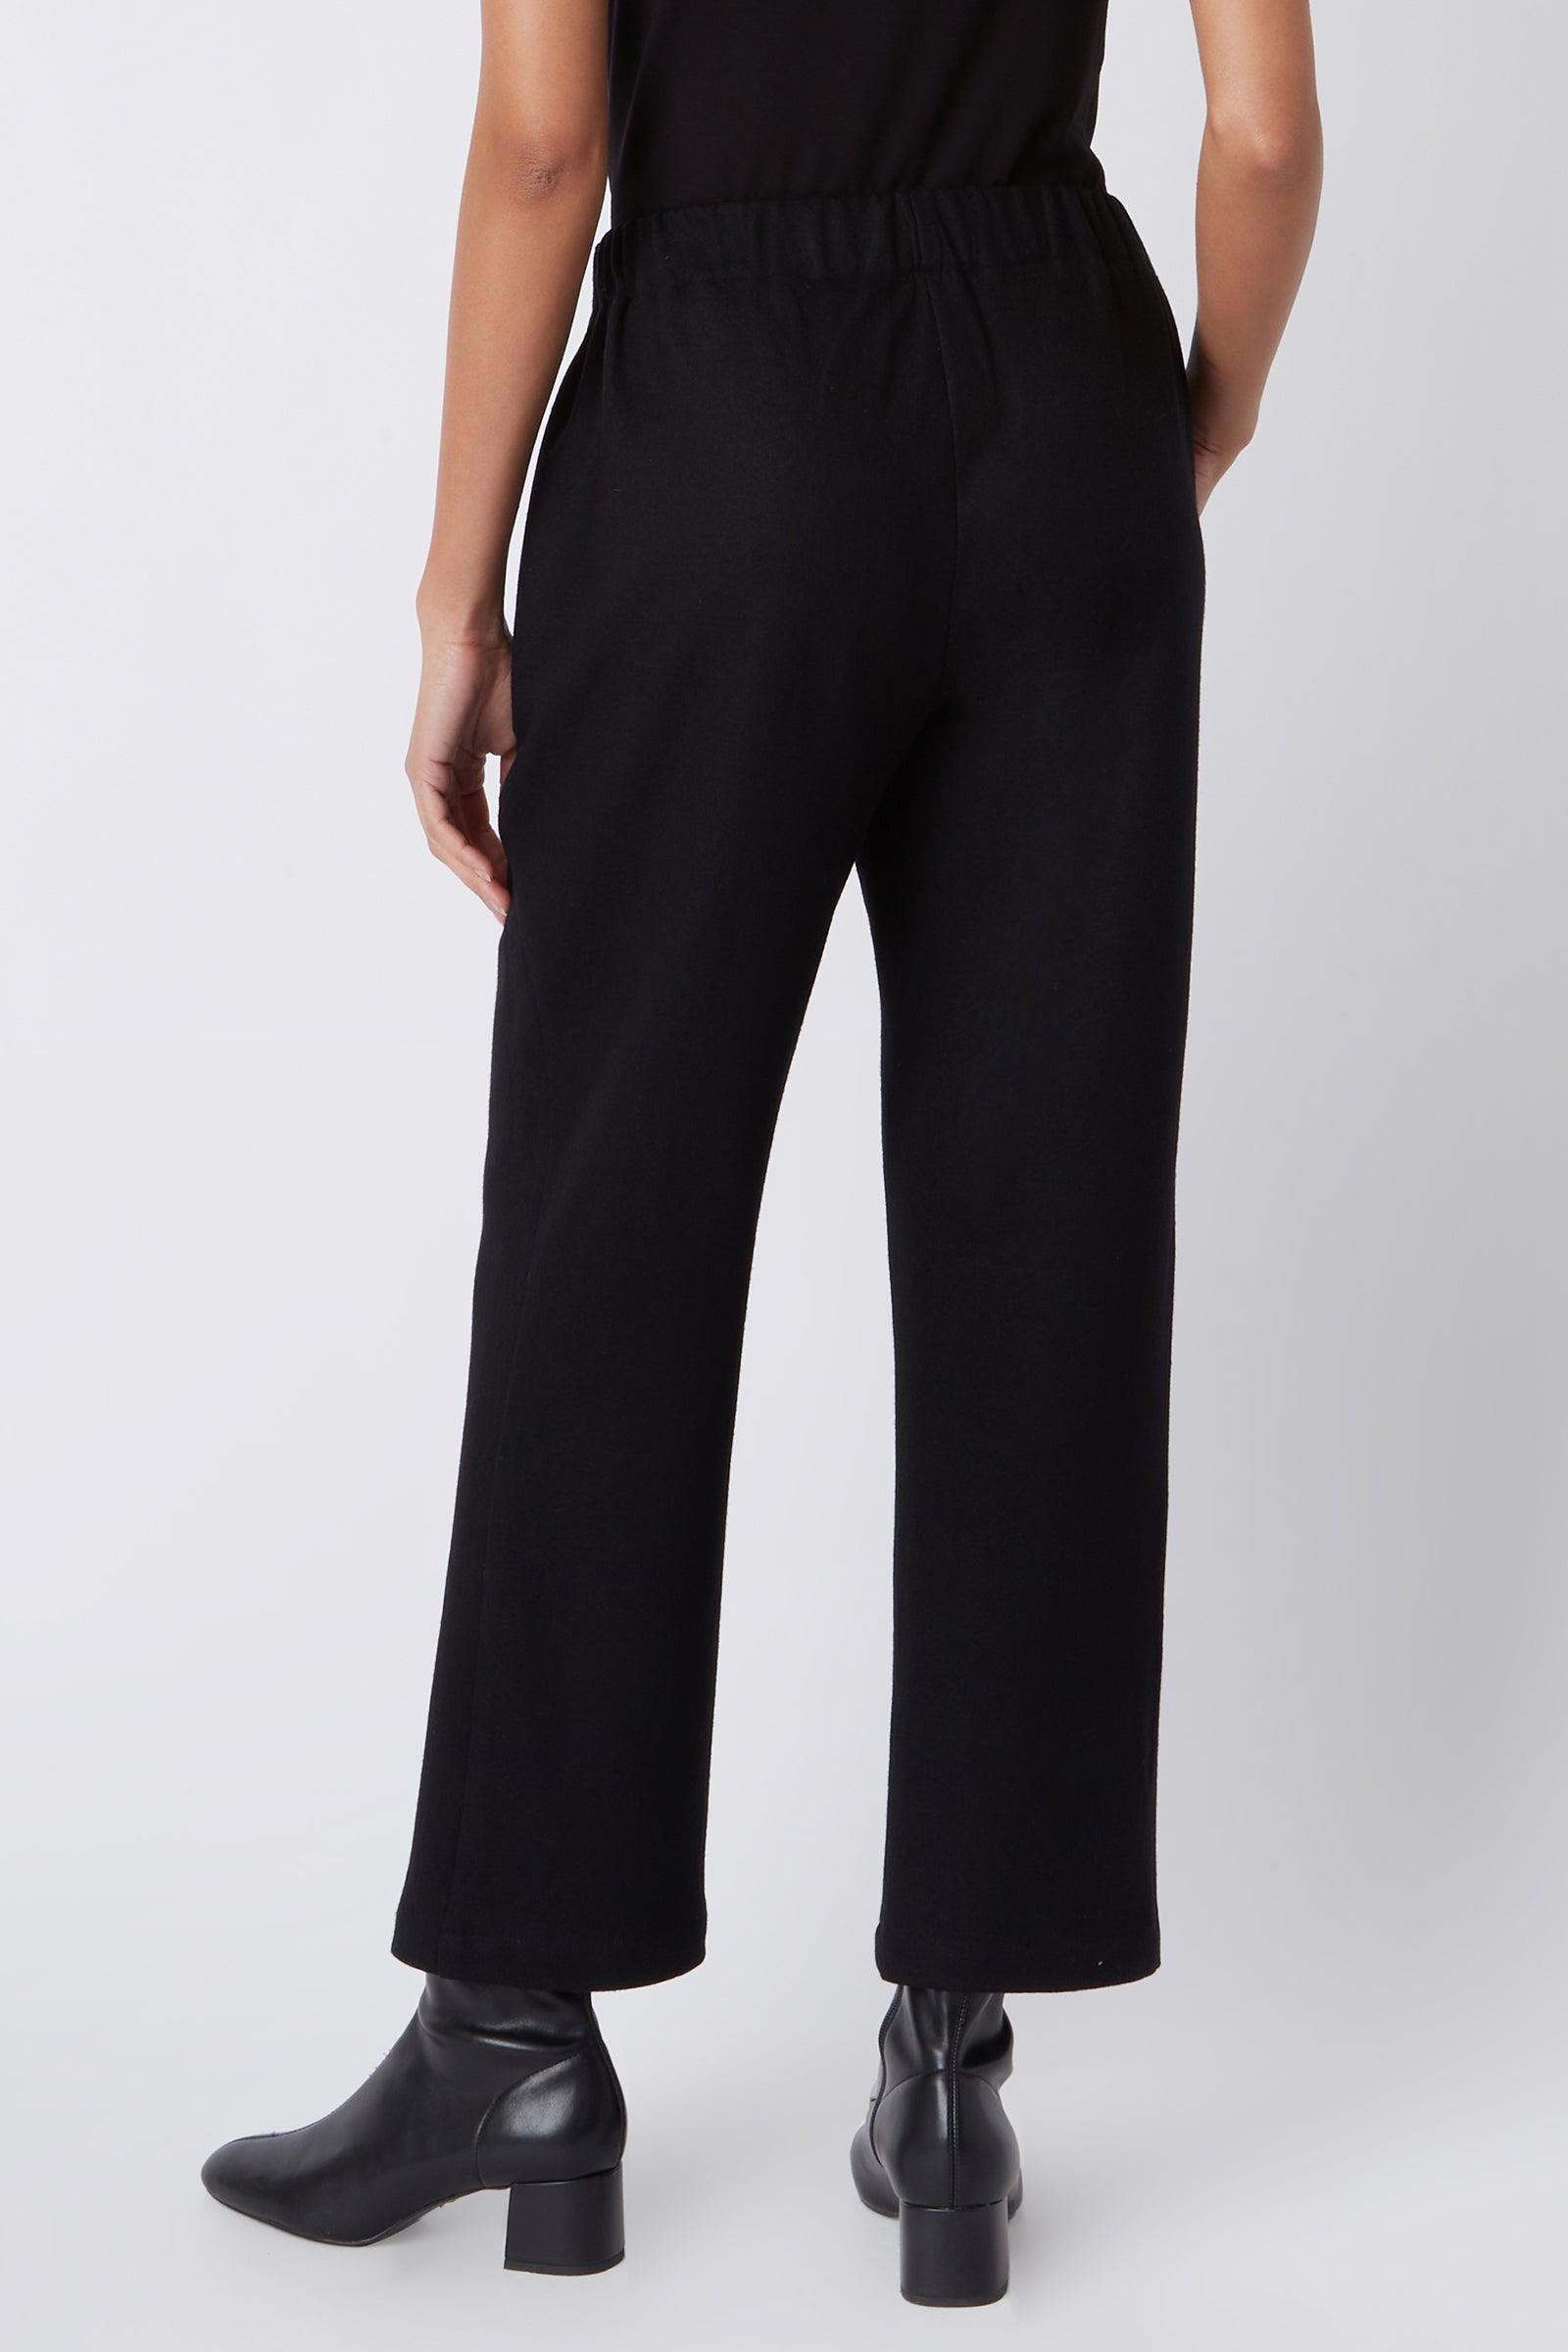 Kal Rieman Felted Jersey Angle Seam Crop Pant in Black Felted Jersey on Model Detailed Back View